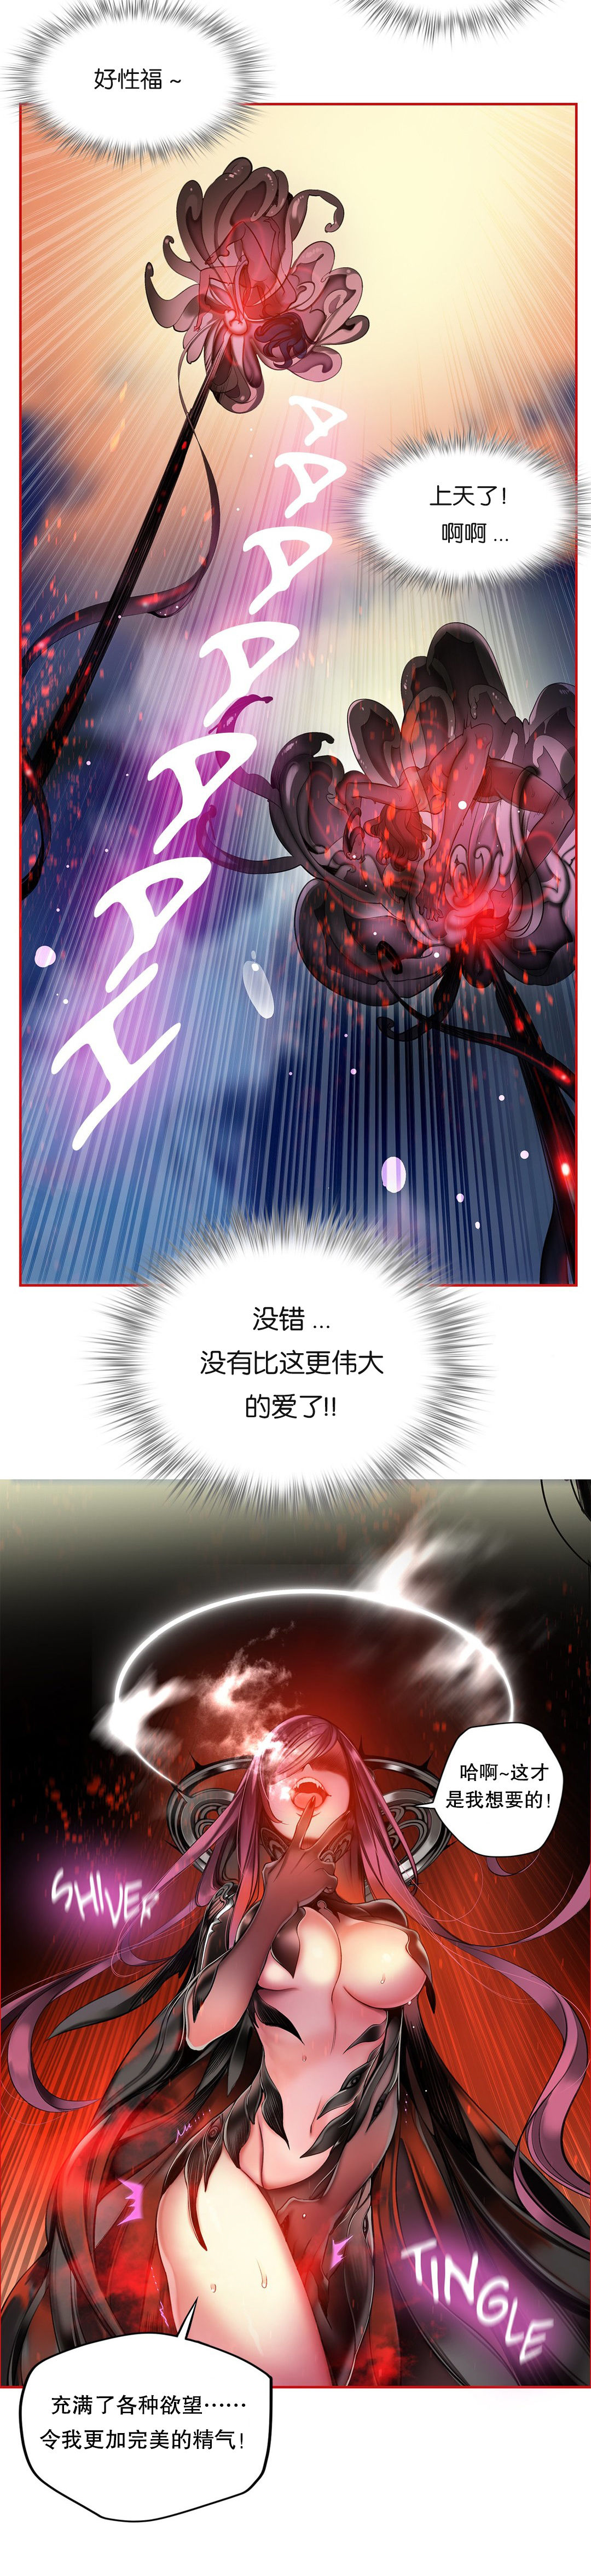 [Juder] Lilith`s Cord (第二季) Ch.61-73 [Chinese] [aaatwist个人汉化] [Ongoing] 